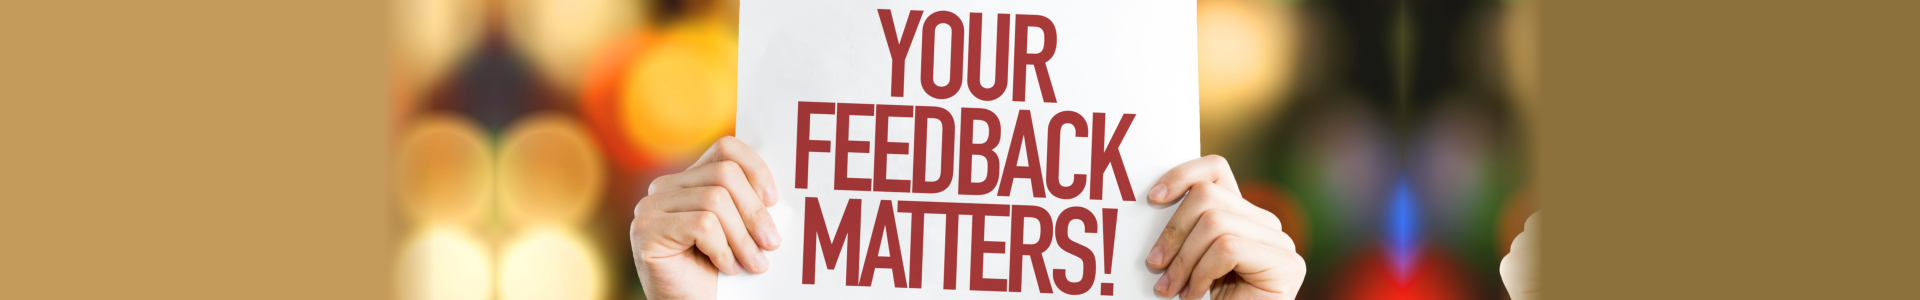 your feed back matters signage